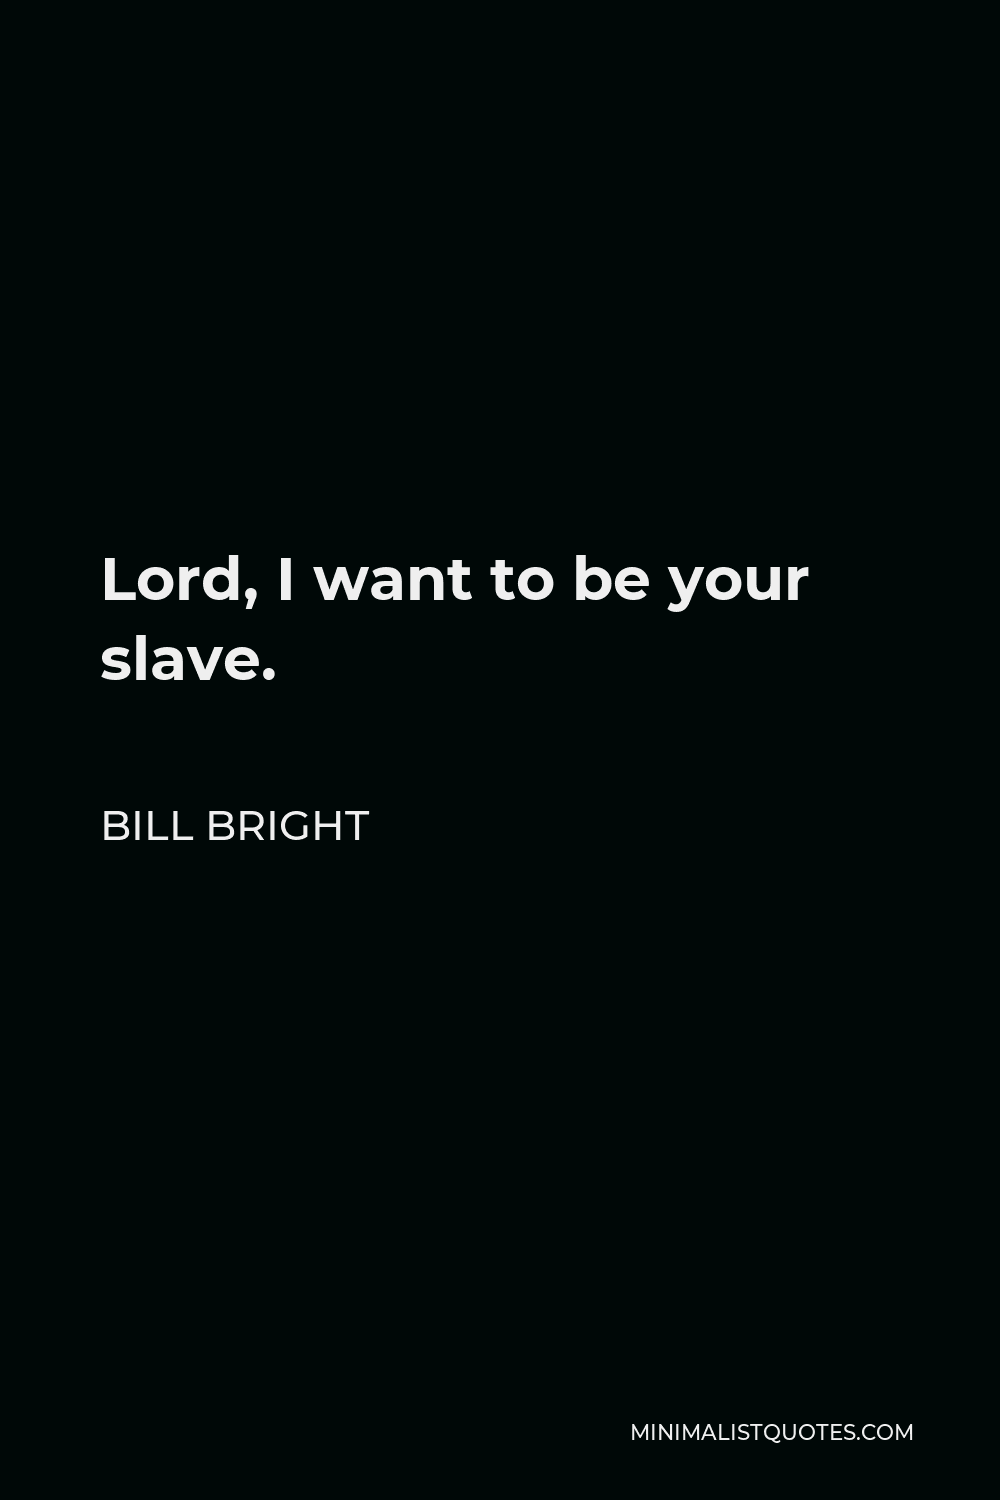 Bill Bright Quote - Lord, I want to be your slave.